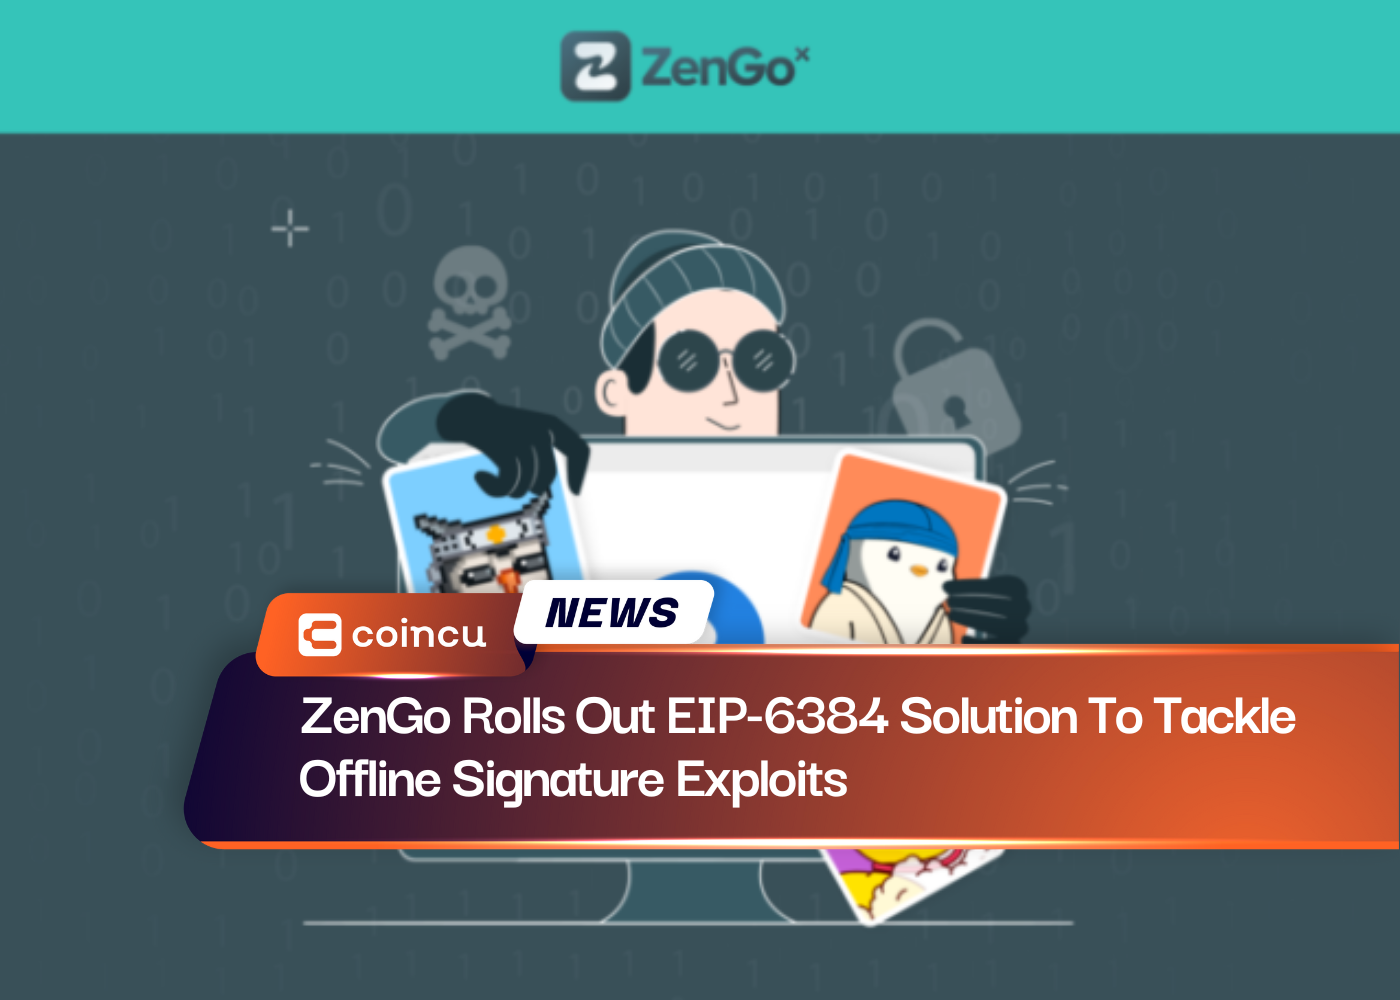 ZenGo Rolls Out EIP-6384 Solution To Tackle Offline Signature Exploits